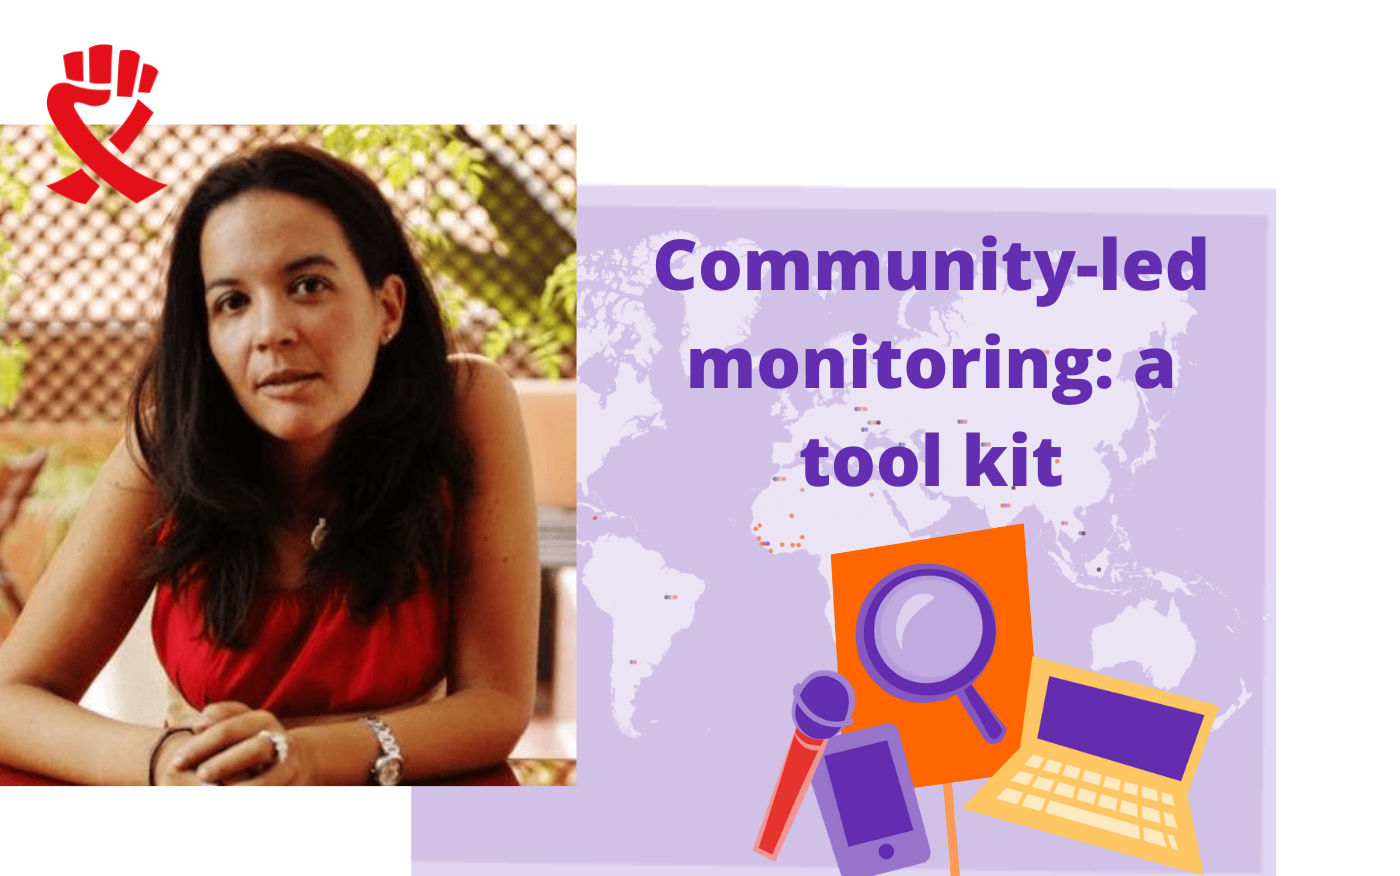 Interested in Community-led Monitoring and Advocacy? This step-by-step Toolkit is for you!